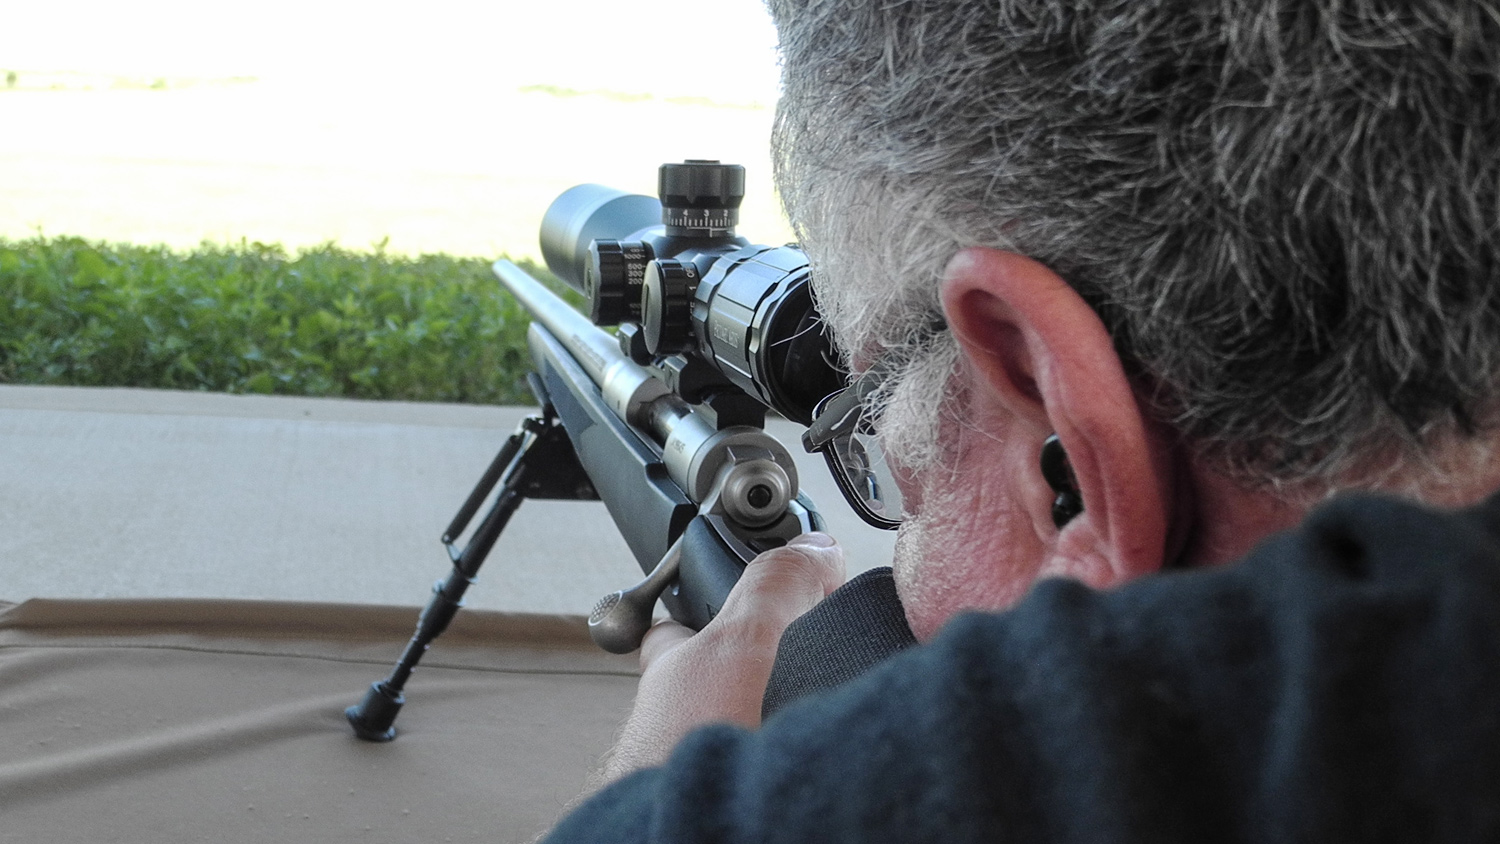 Kevin Creighton, 1000-Yard Rifle for $1,000 With a Twist: For Lefties